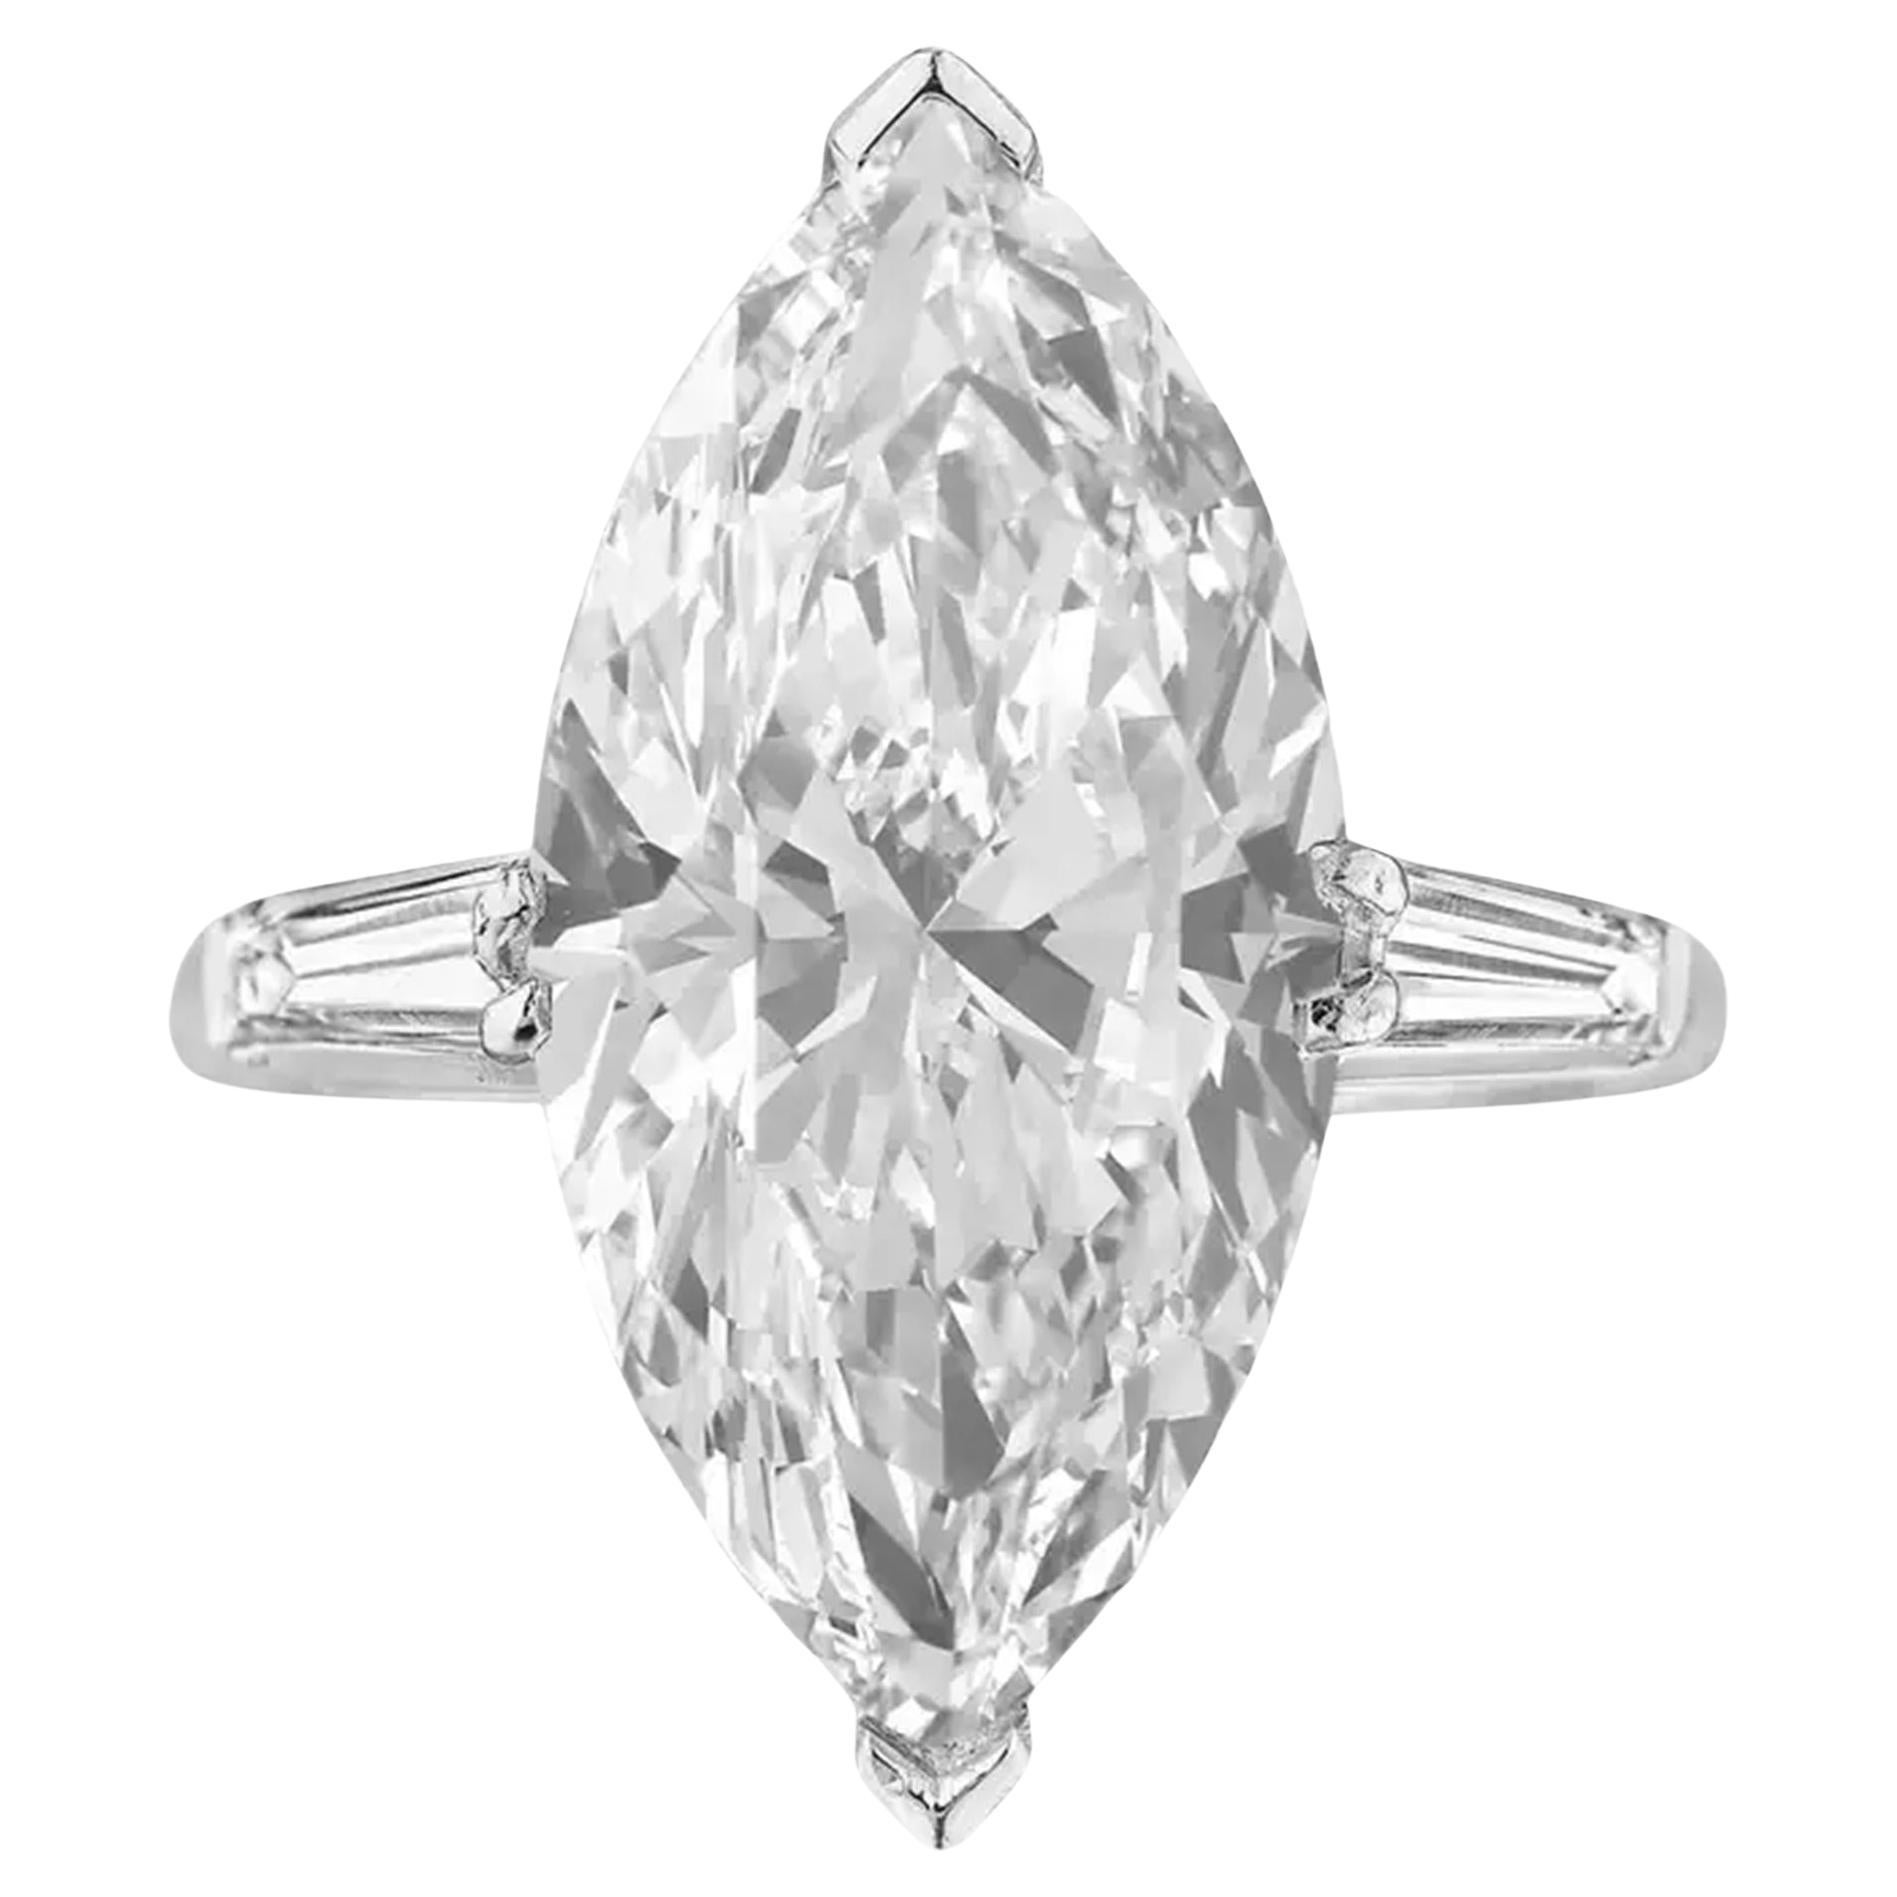 Exceptional GIA Certified 6 Carat Marquise Diamond Ring D FLAWLESS